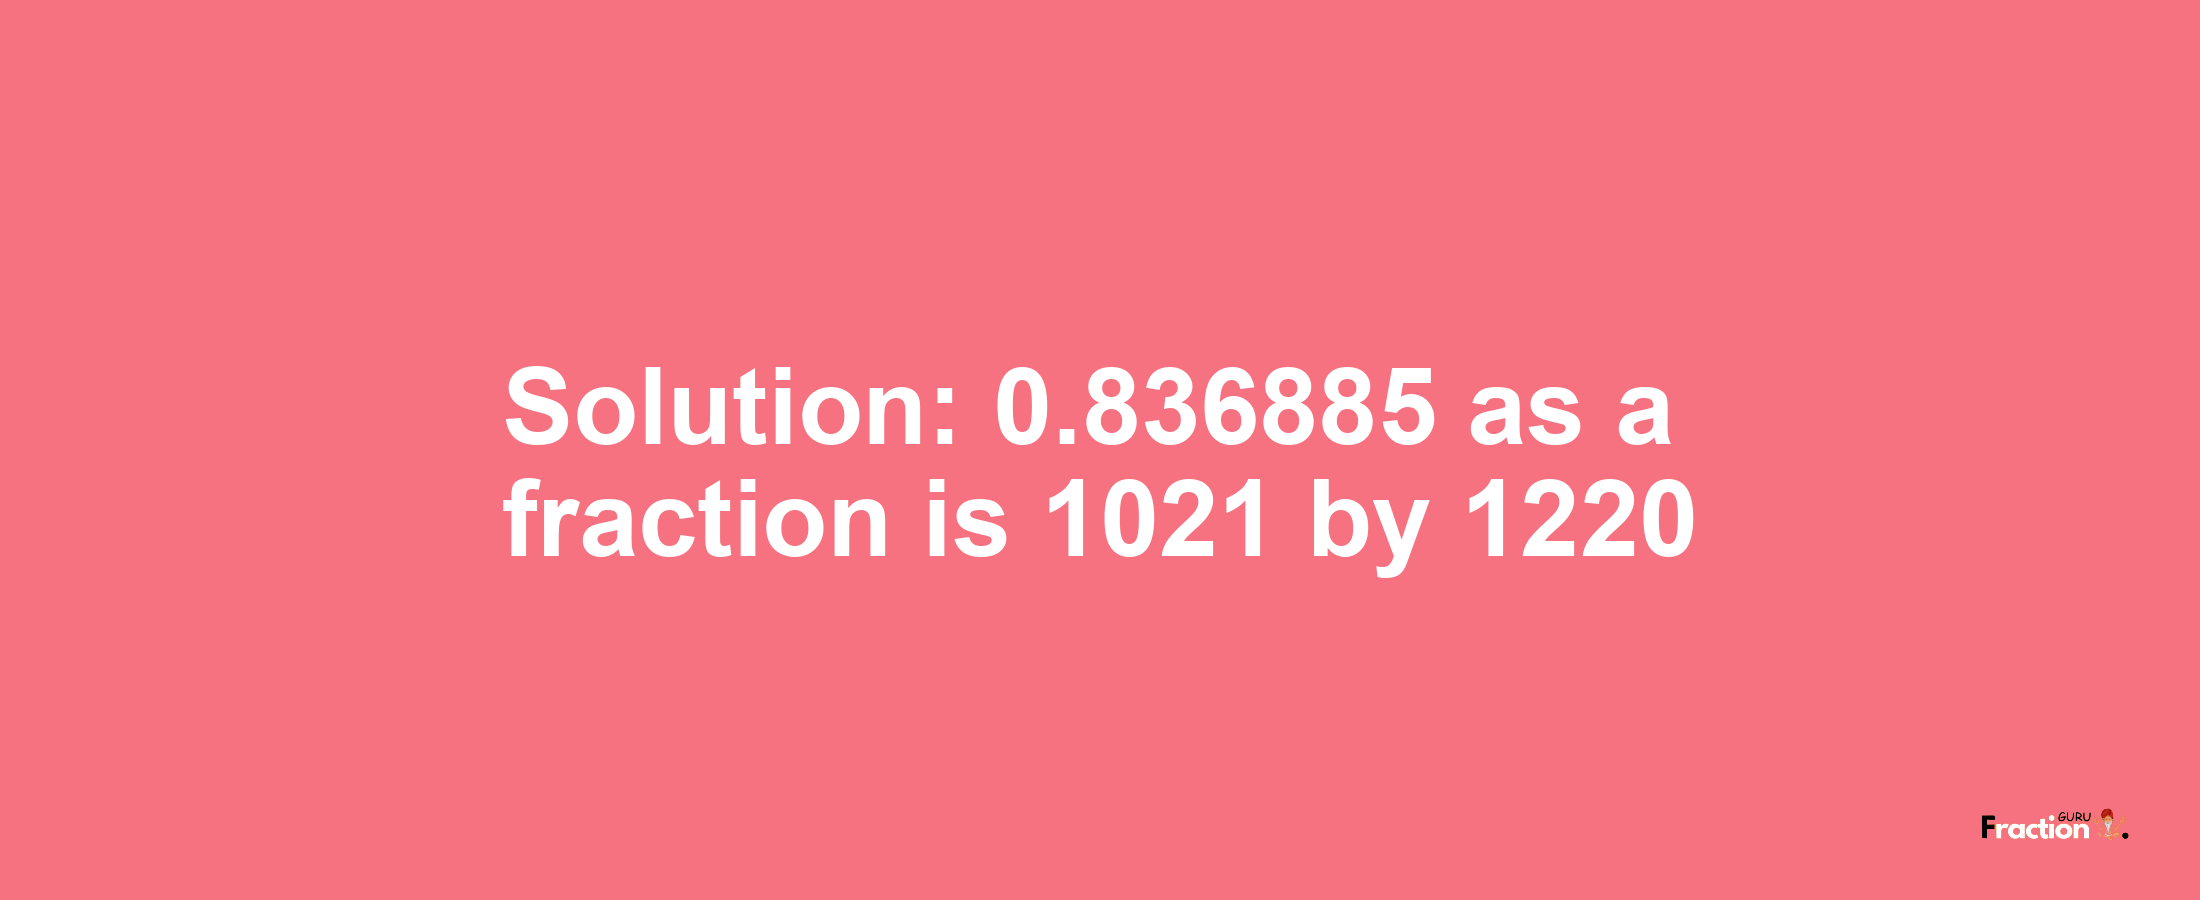 Solution:0.836885 as a fraction is 1021/1220